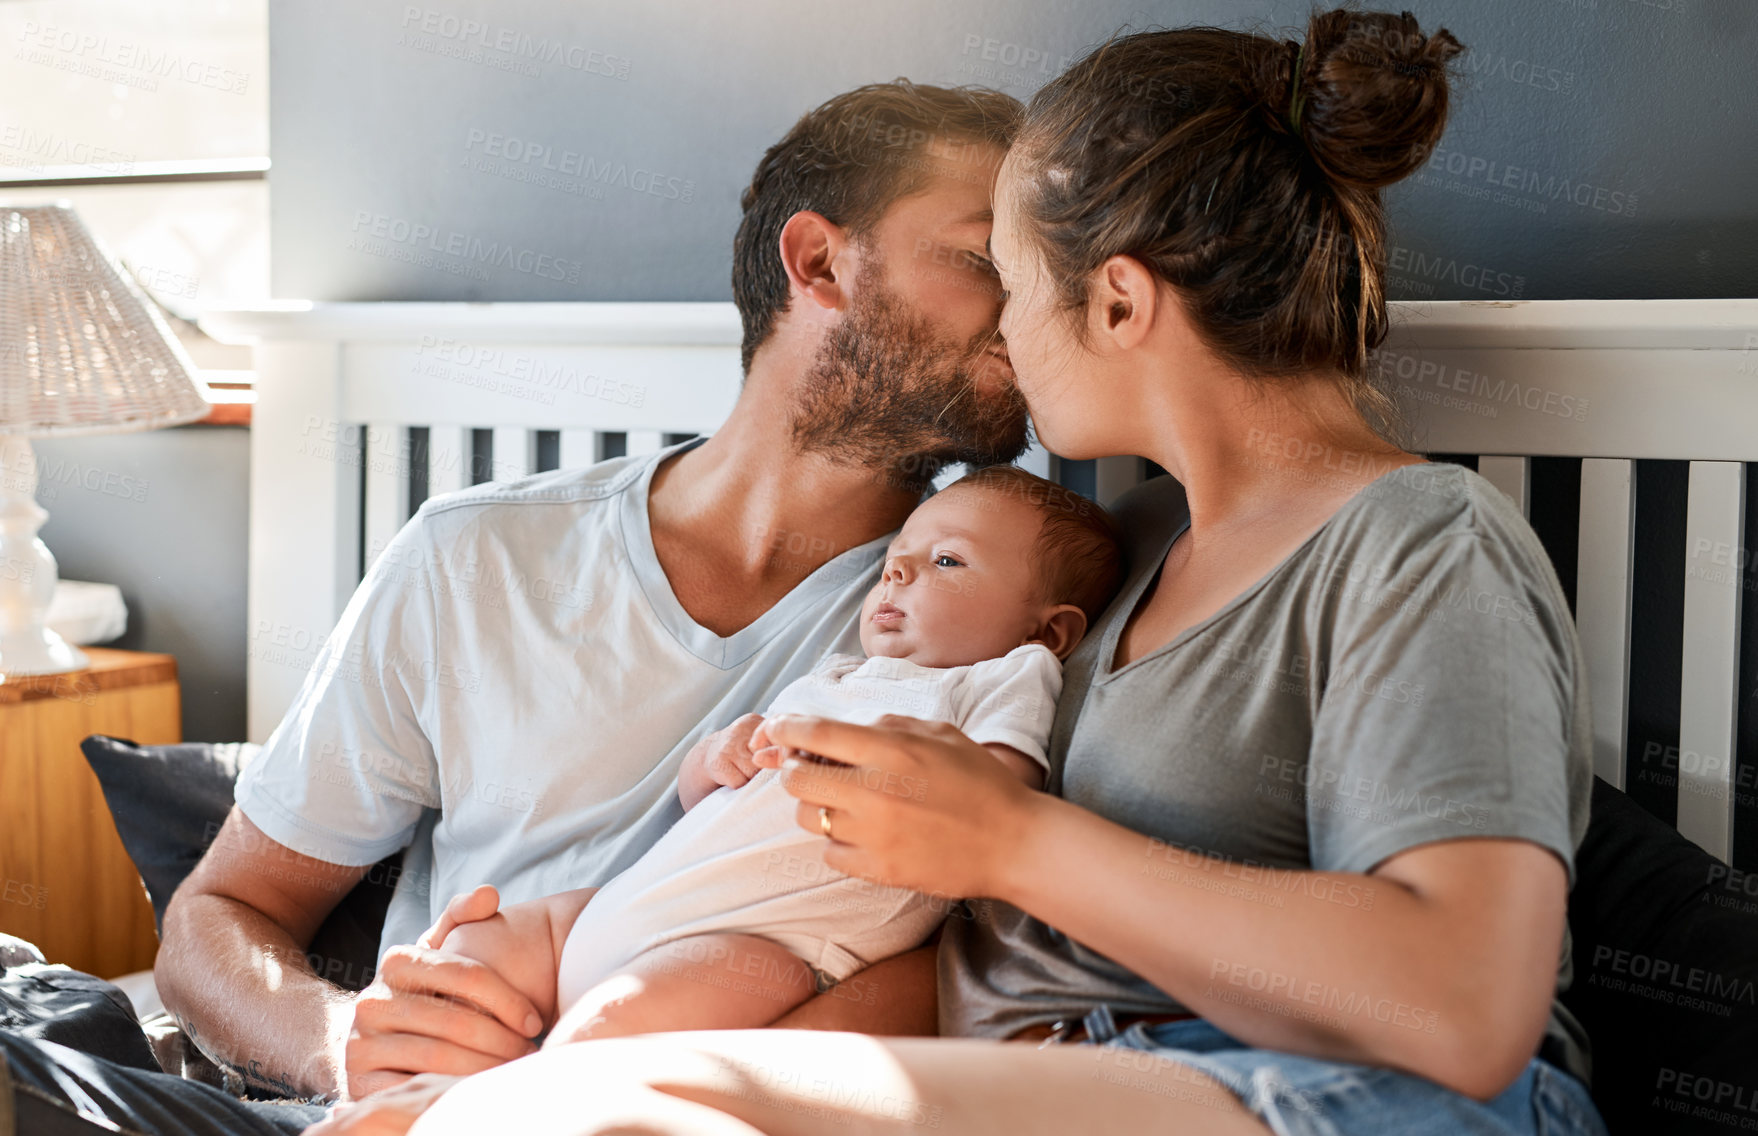 Buy stock photo Shot of a young mother and father bonding with their newborn baby boy in the bedroom